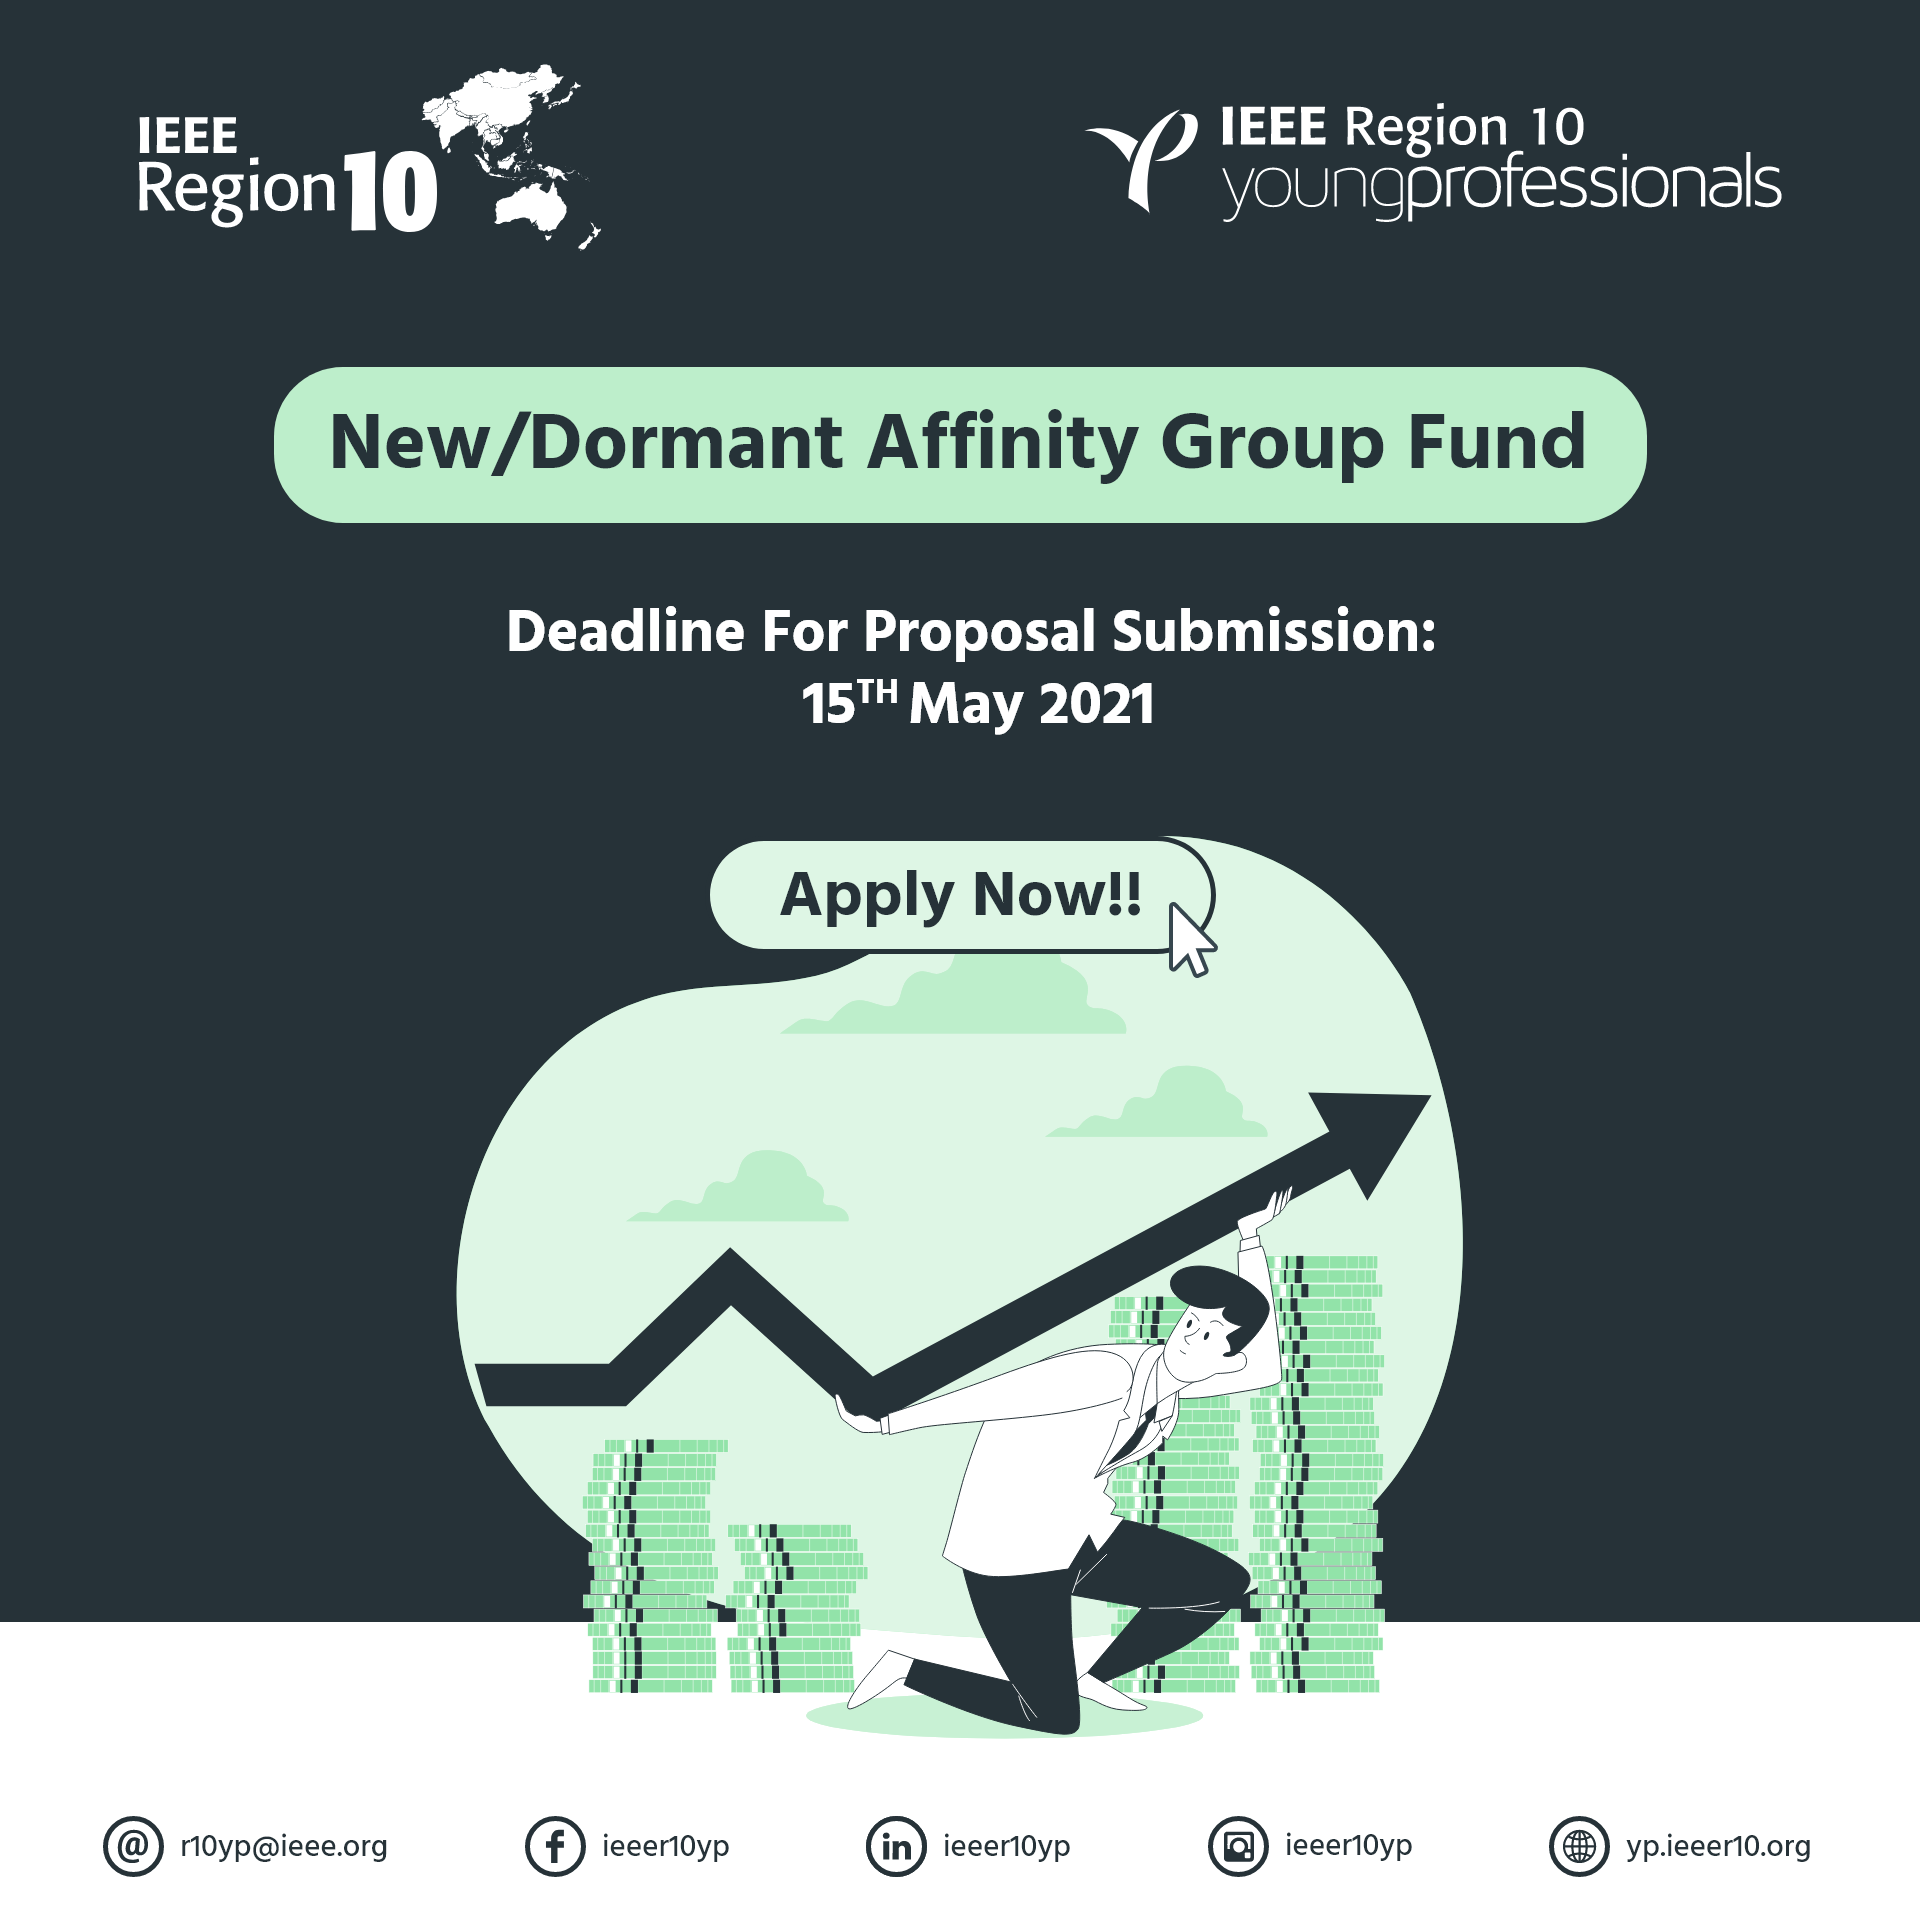 R10 Young Professionals New/Dormant Affinity Group Fund